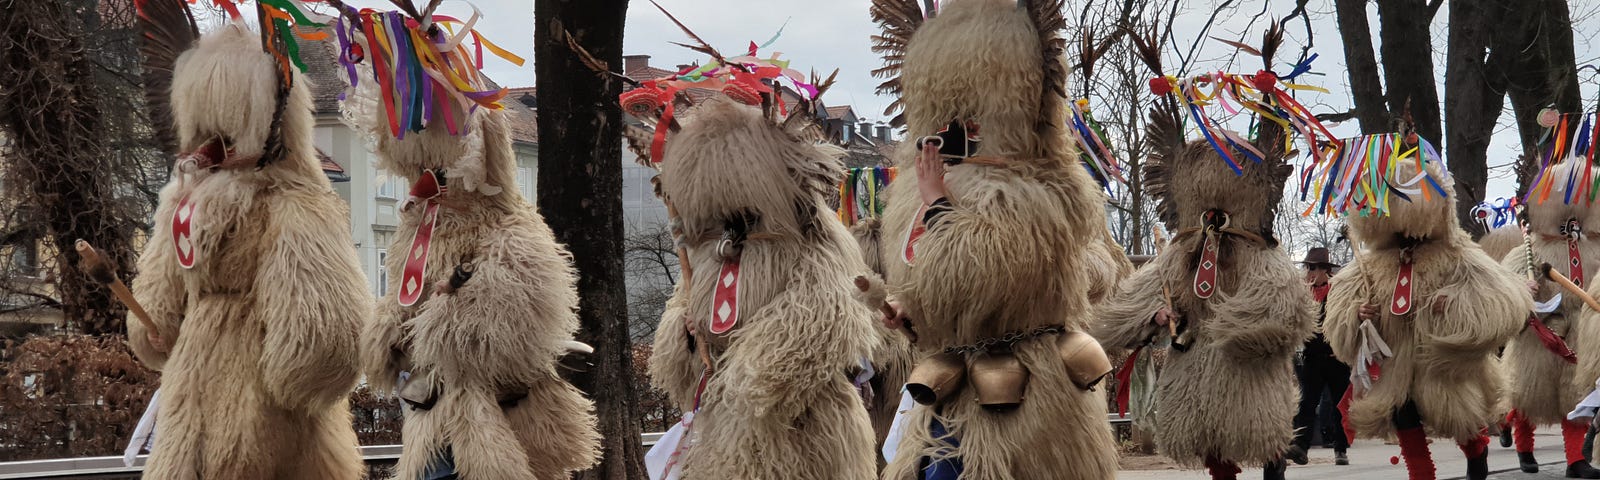 Kurenti or carnival creatures in Ljubljana, Slovenia. They are men dressed up in sheepskin with headdresses and bells on their belts.